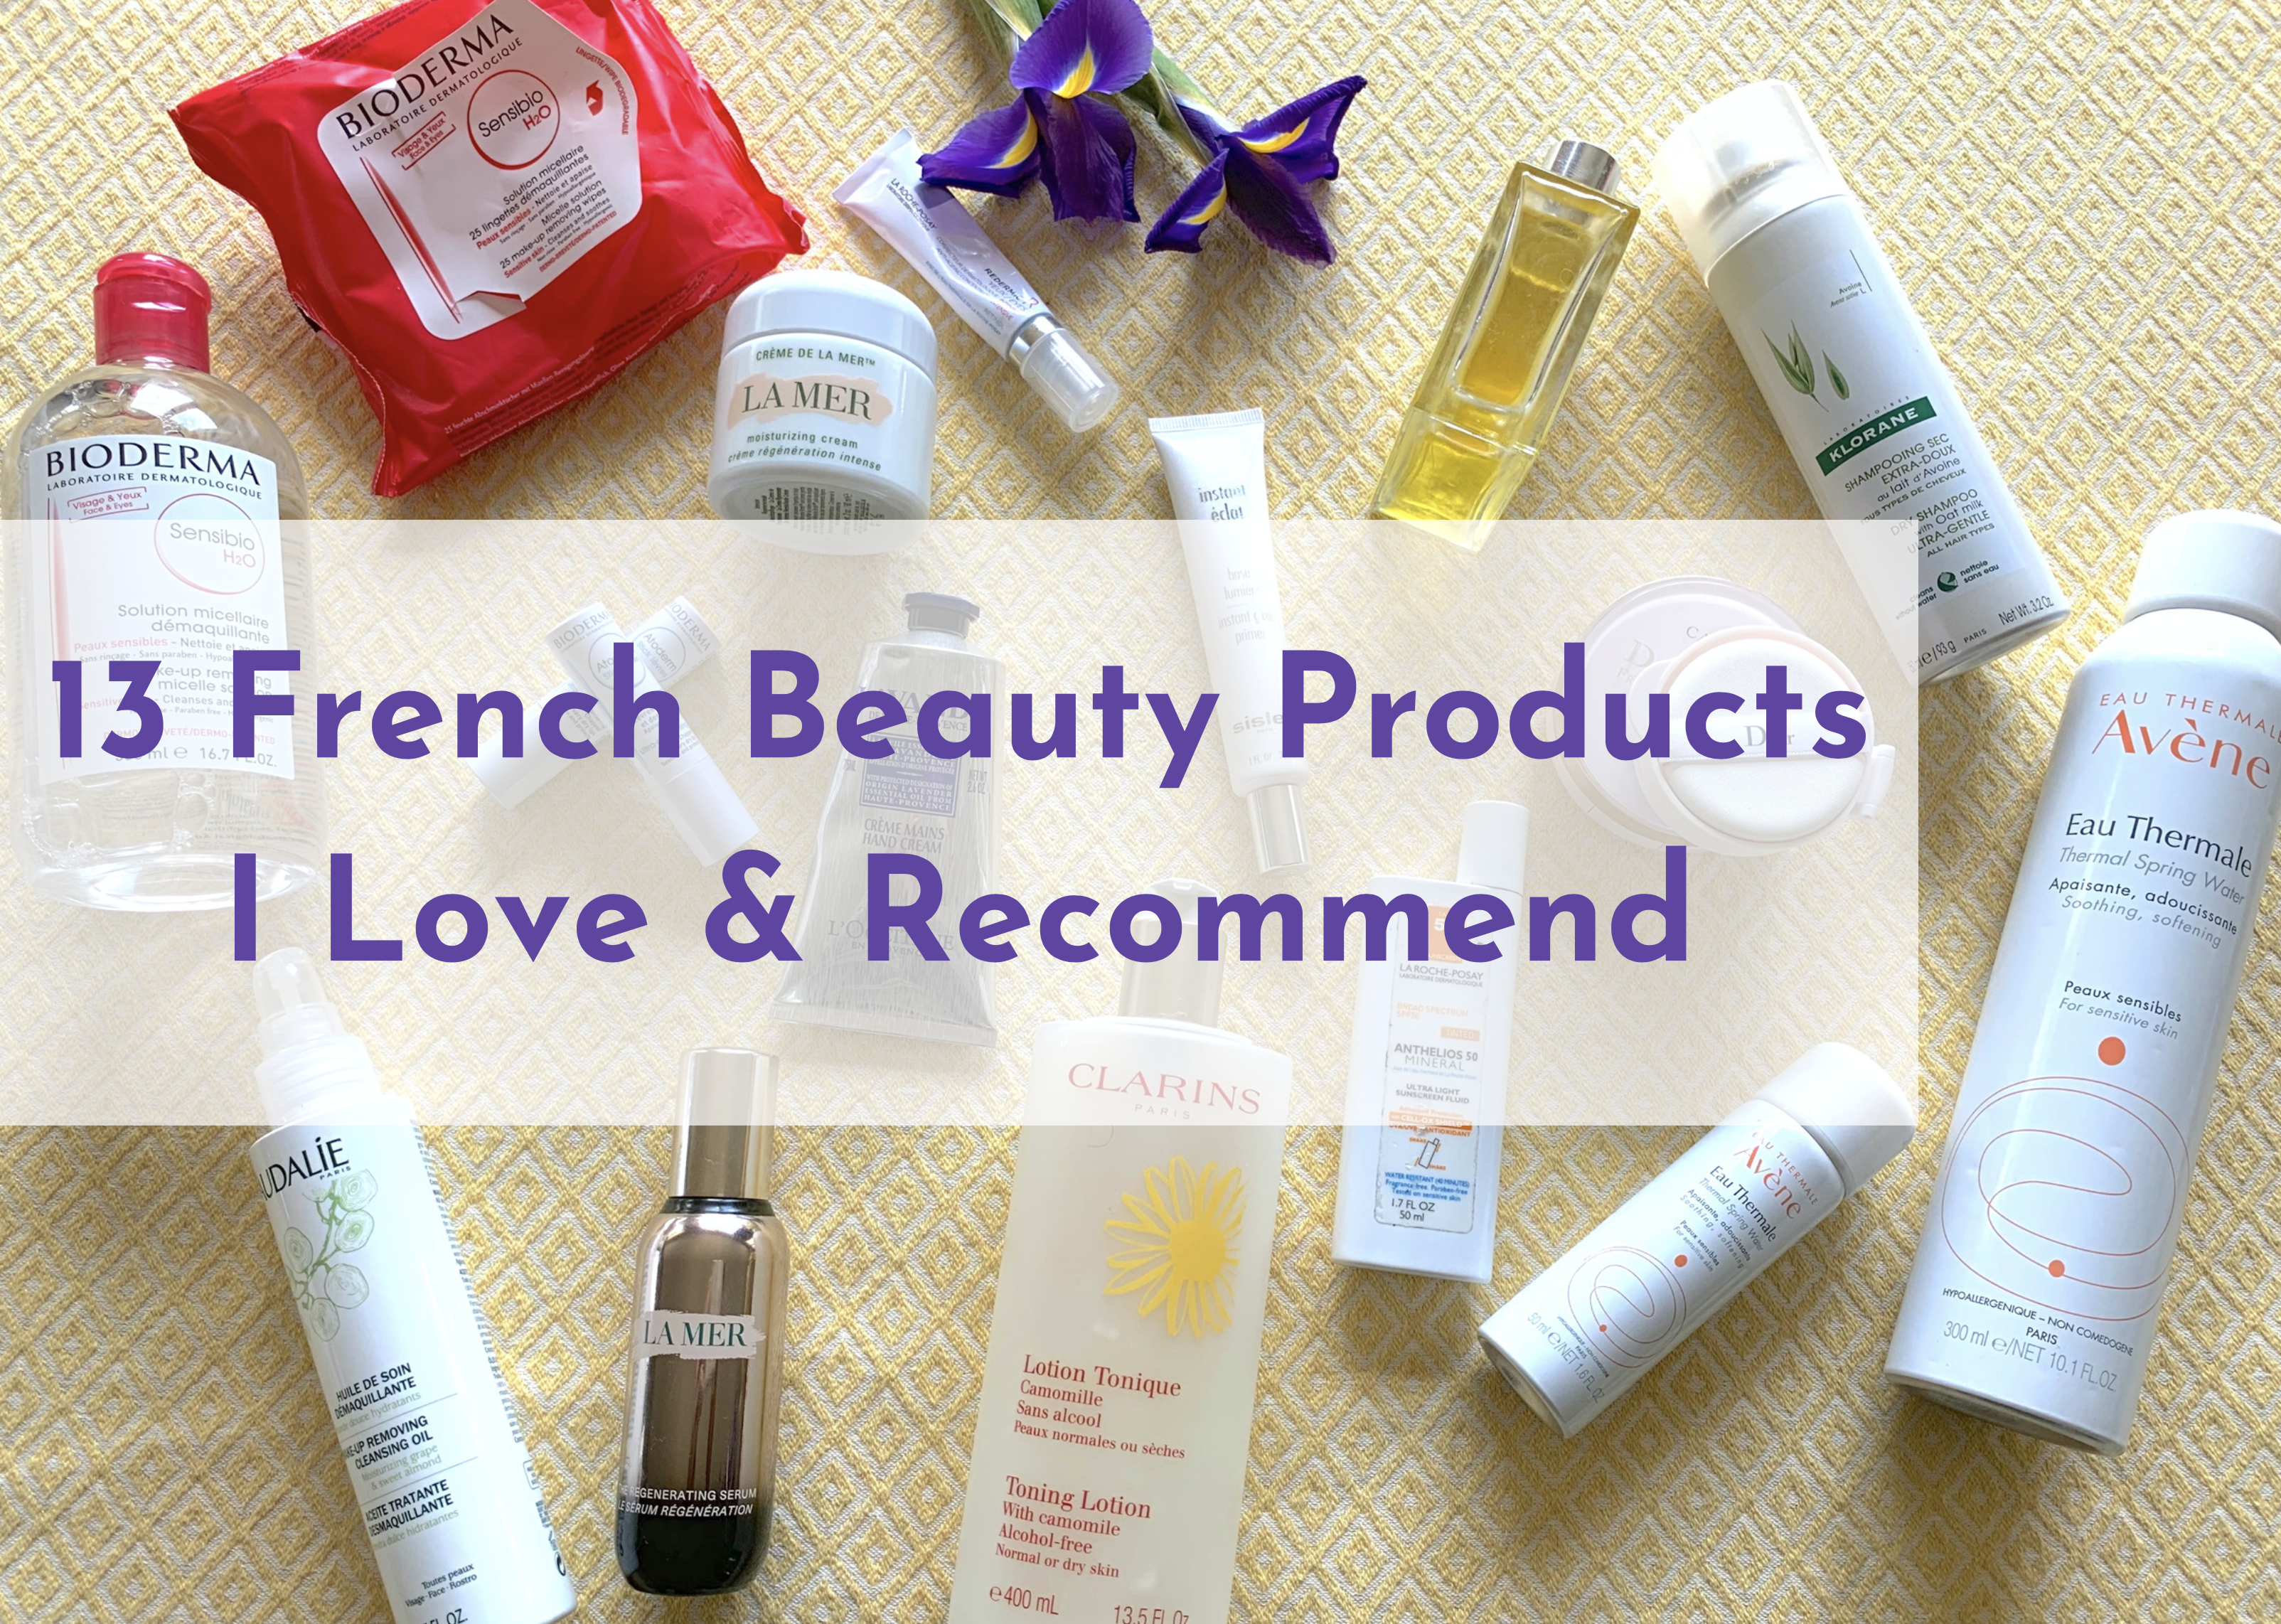 Updated! 14 French Beauty Products I Love & Recommend